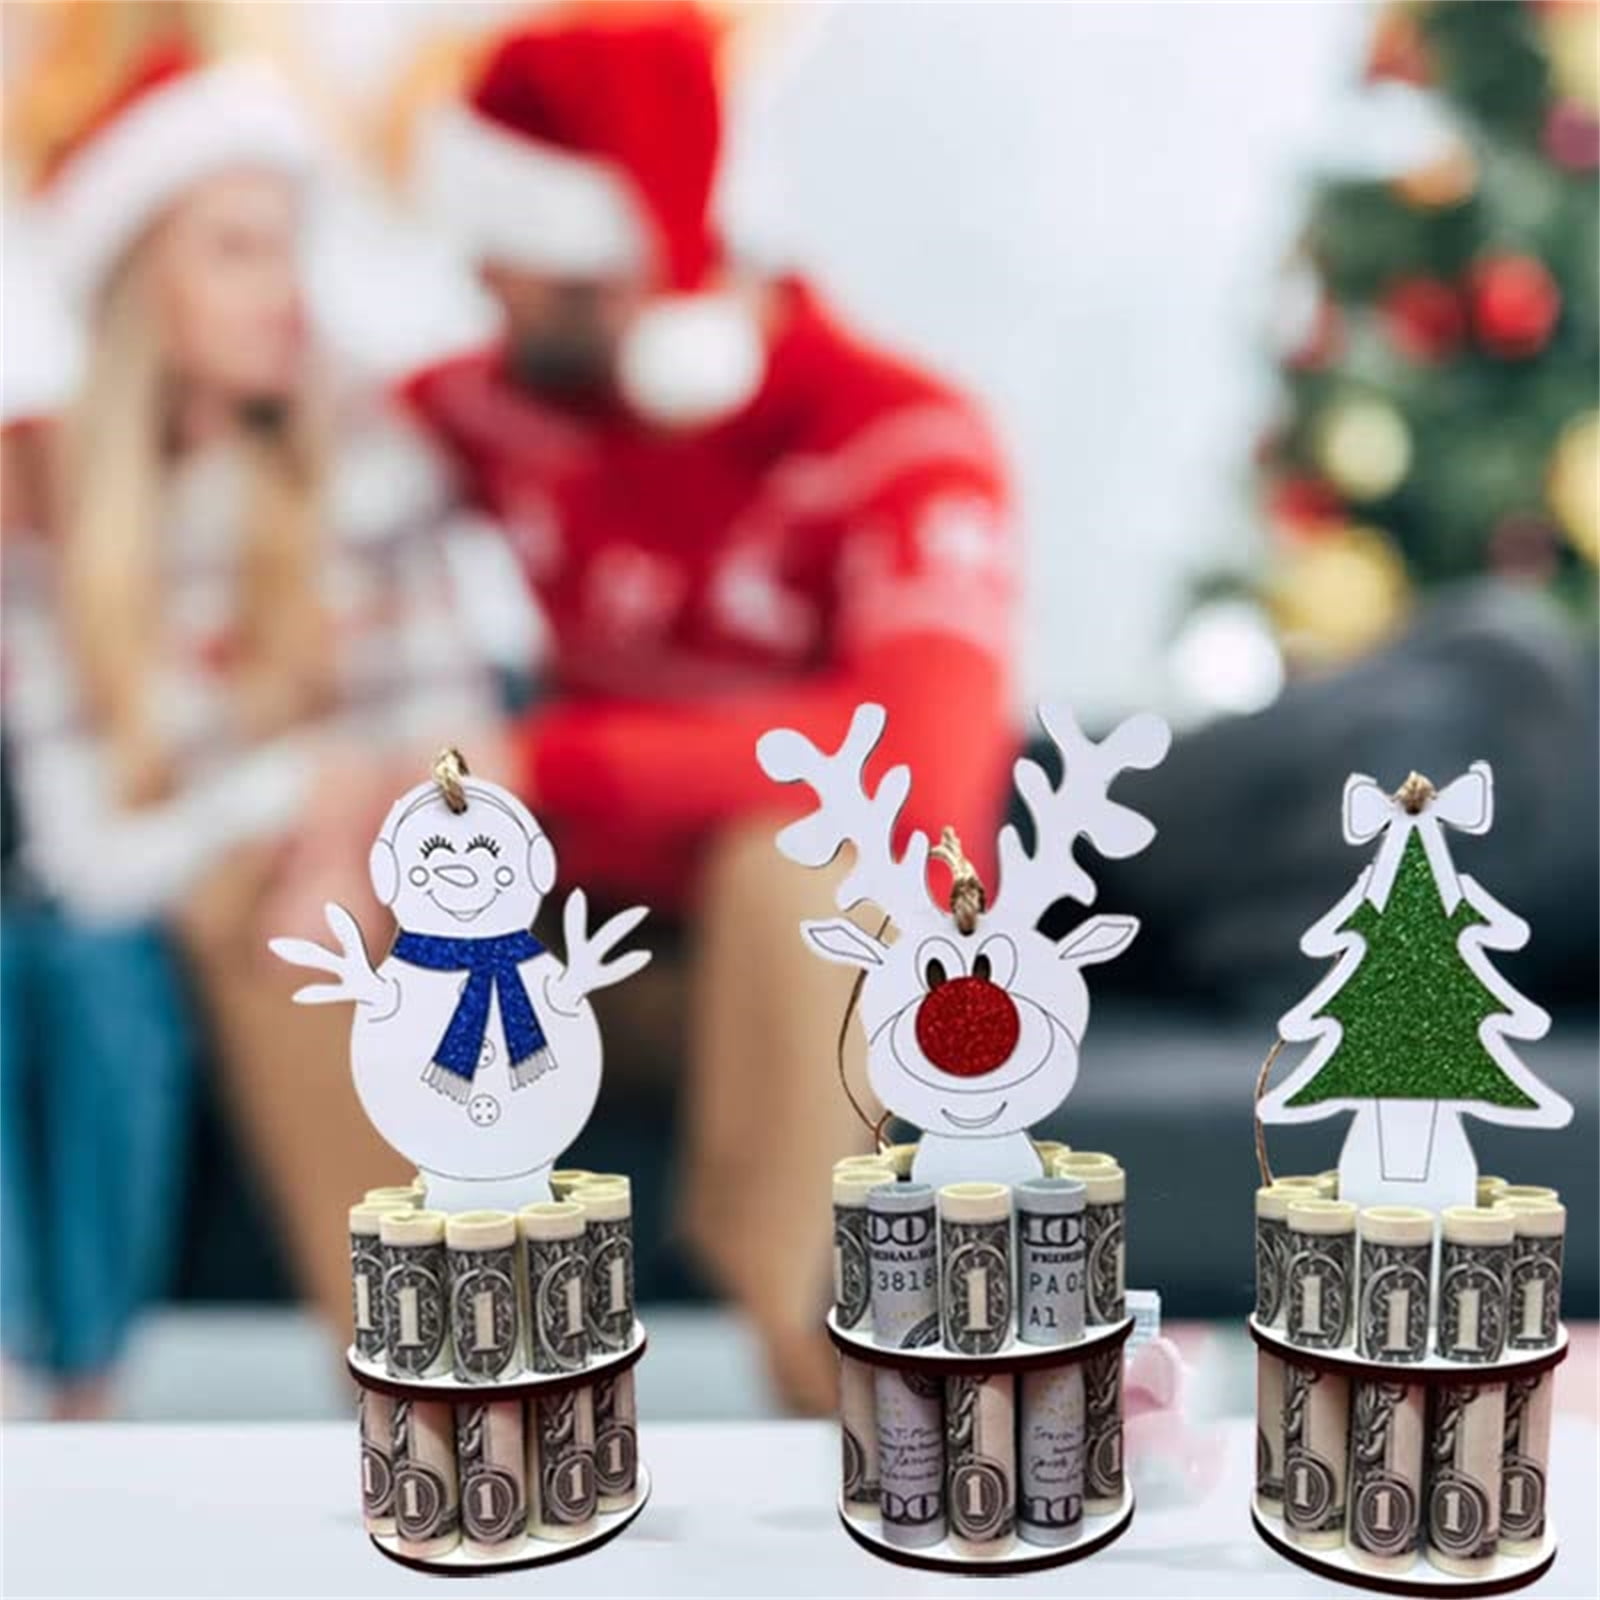 LiLuBuy Unique Christmas Money Support, Handmade Wooden Christmas Tree,  Reindeer, Snowman Money Support, Christmas Table Decorations, Interesting  Gift Ideas For Family And Friends 